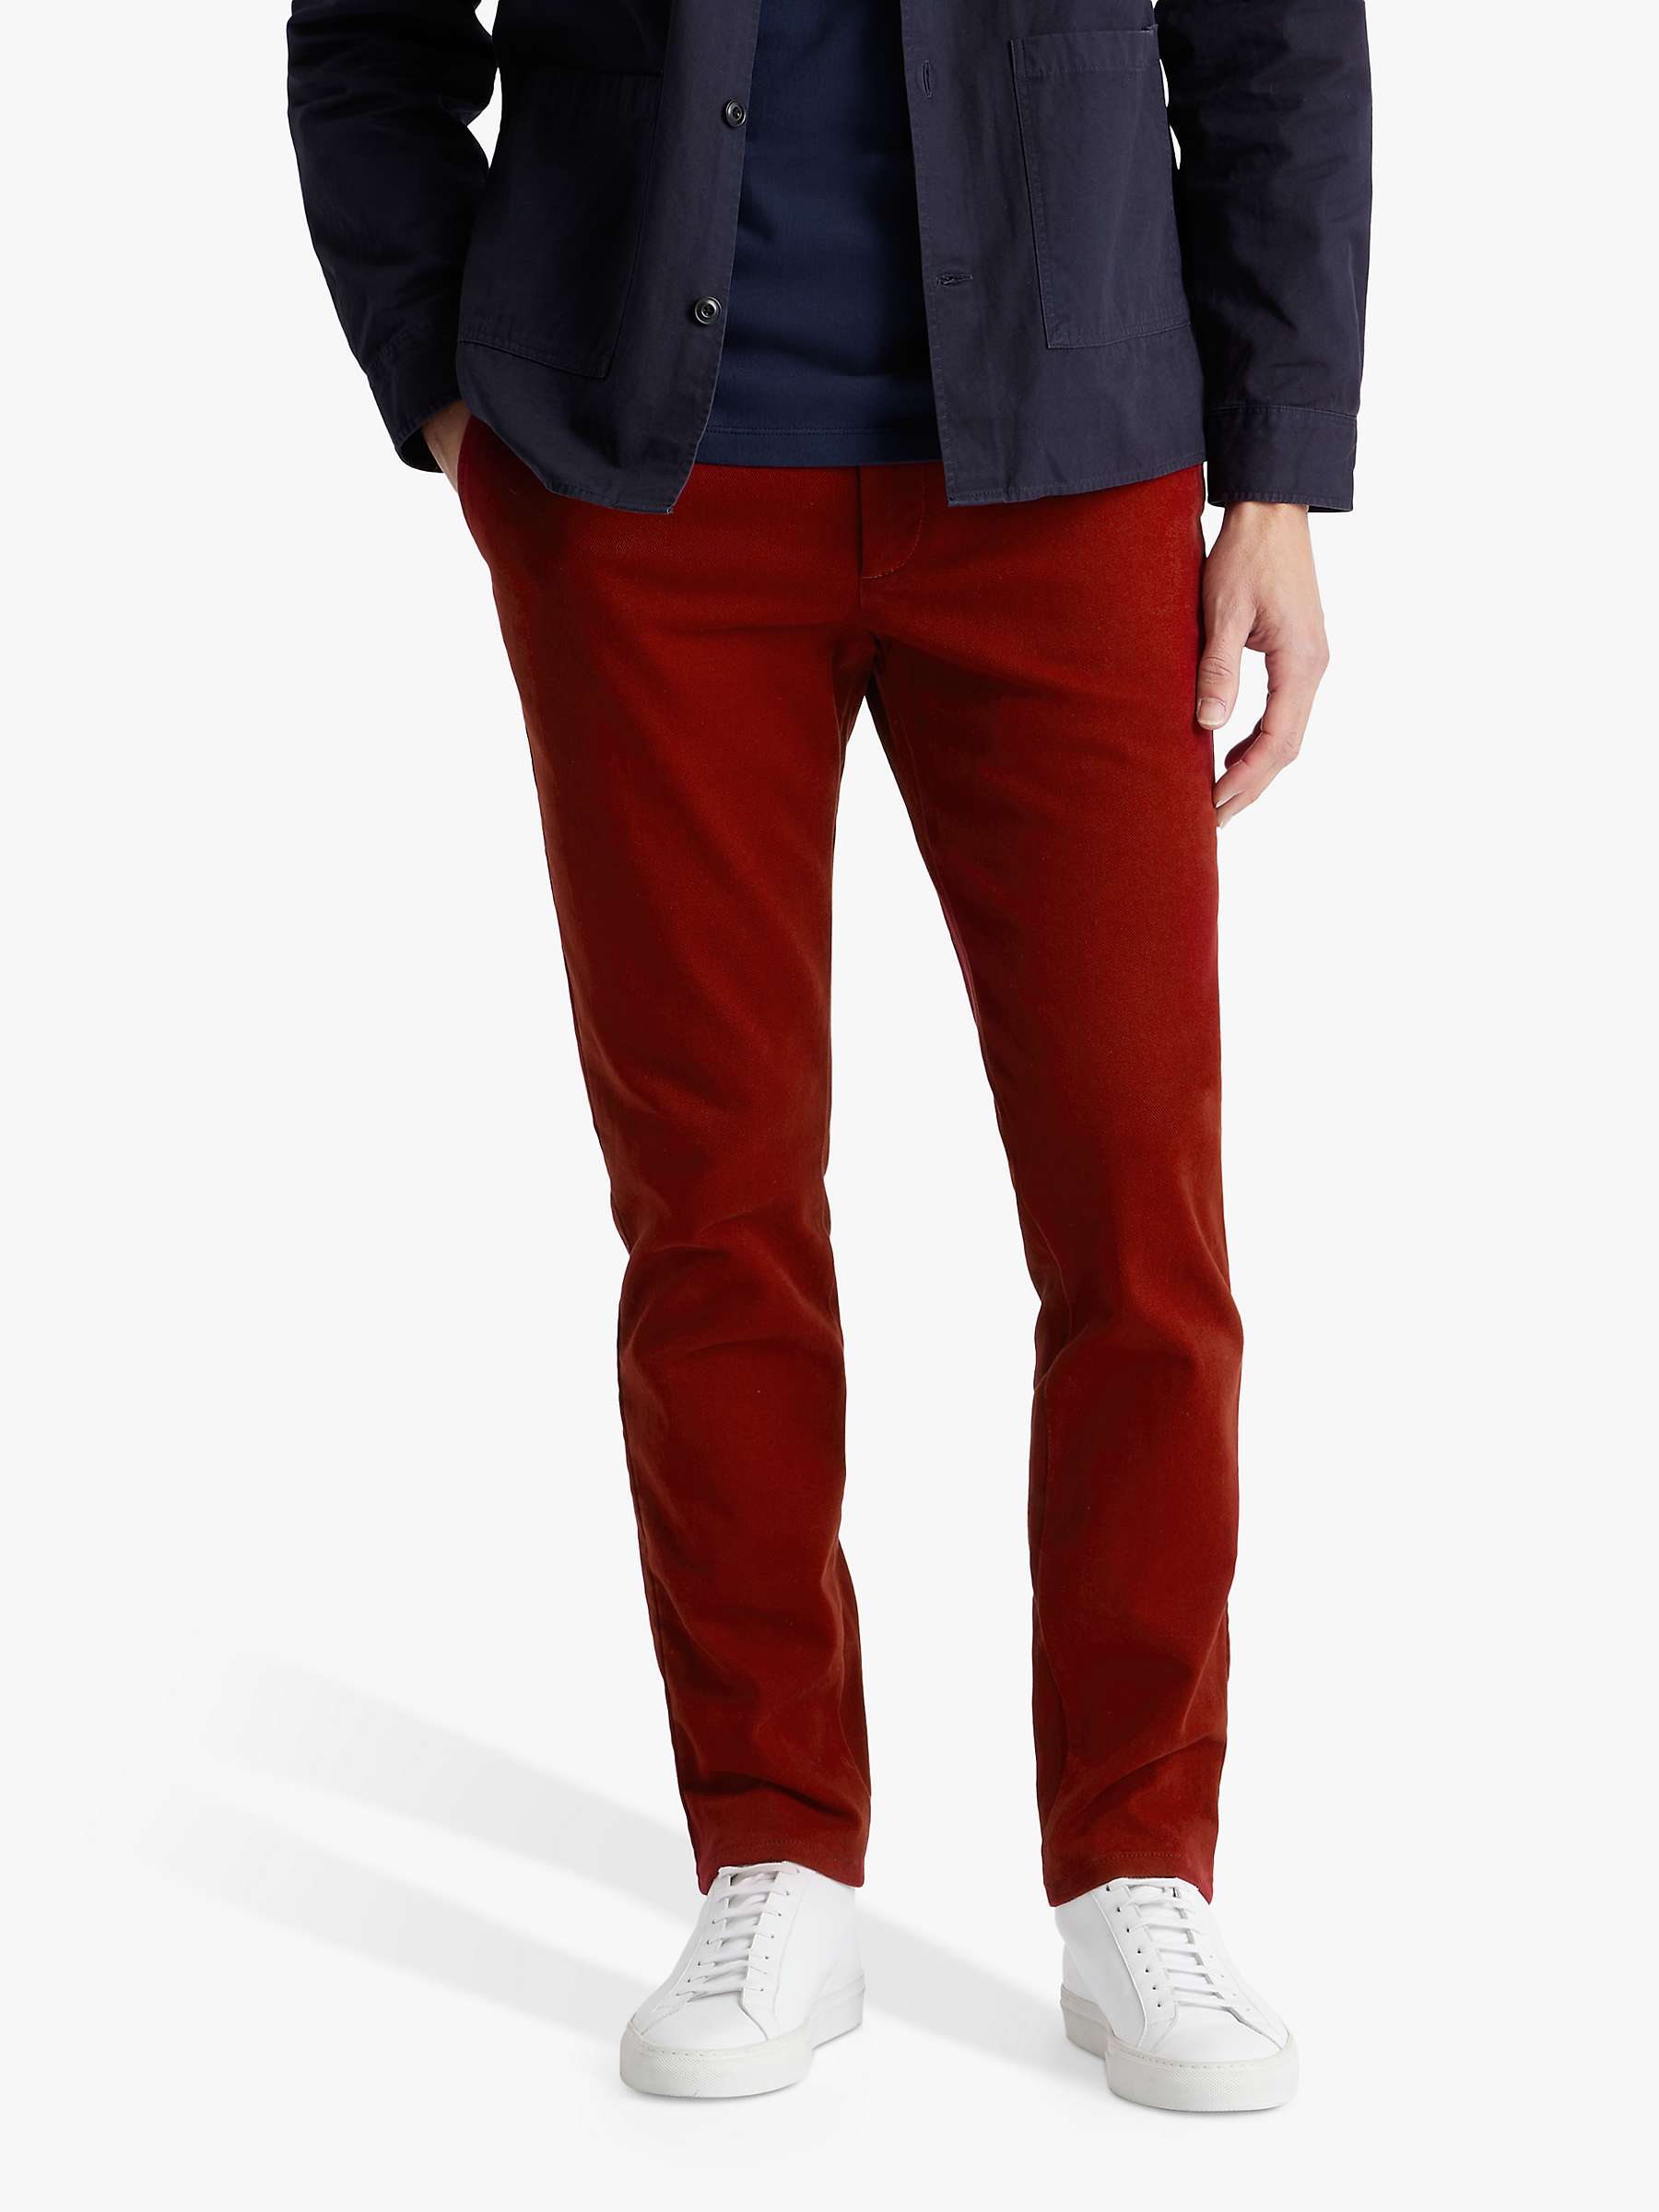 Buy SPOKE Winter Heroes Cotton Blend Narrow Thigh Chinos, Maroon Online at johnlewis.com